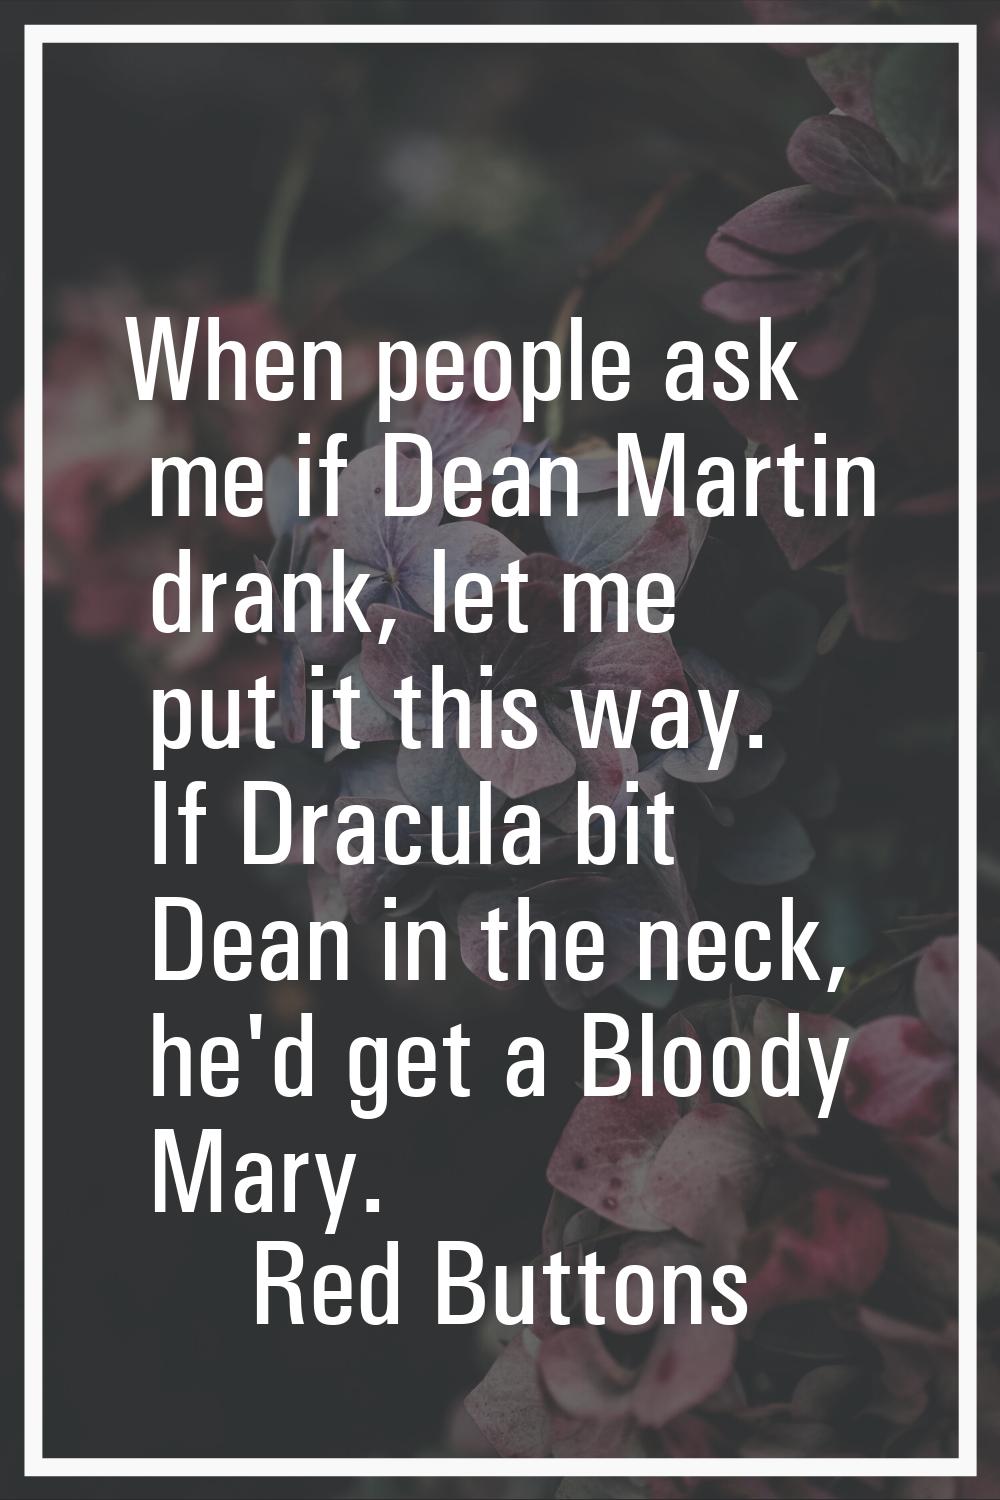 When people ask me if Dean Martin drank, let me put it this way. If Dracula bit Dean in the neck, h